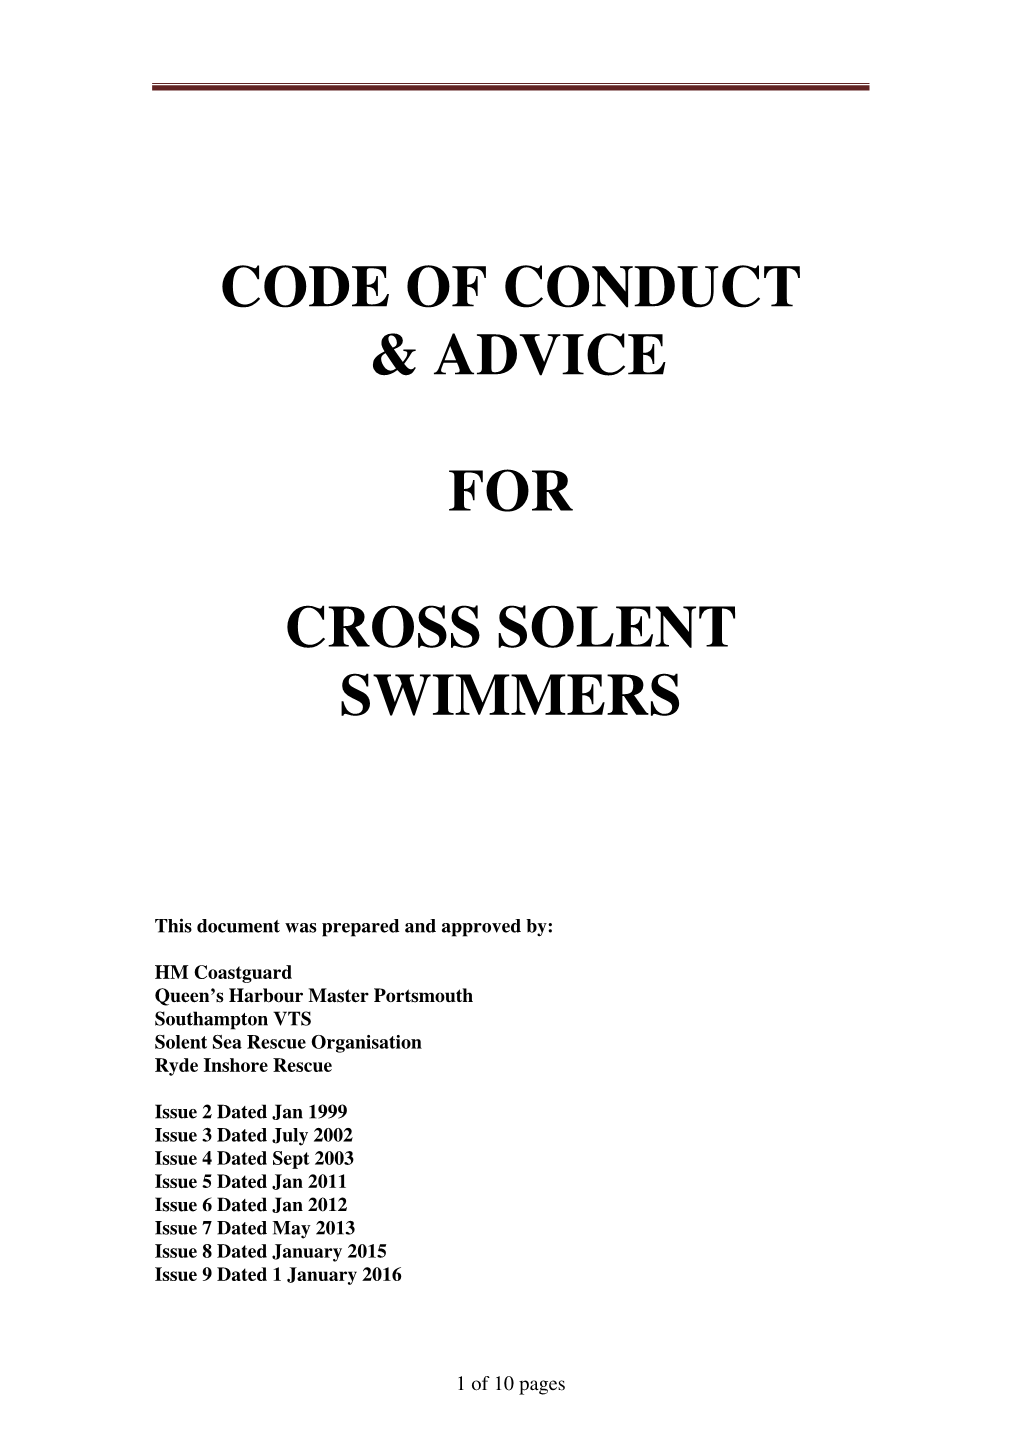 Code of Conduct & Advice for Cross Solent Swimmers